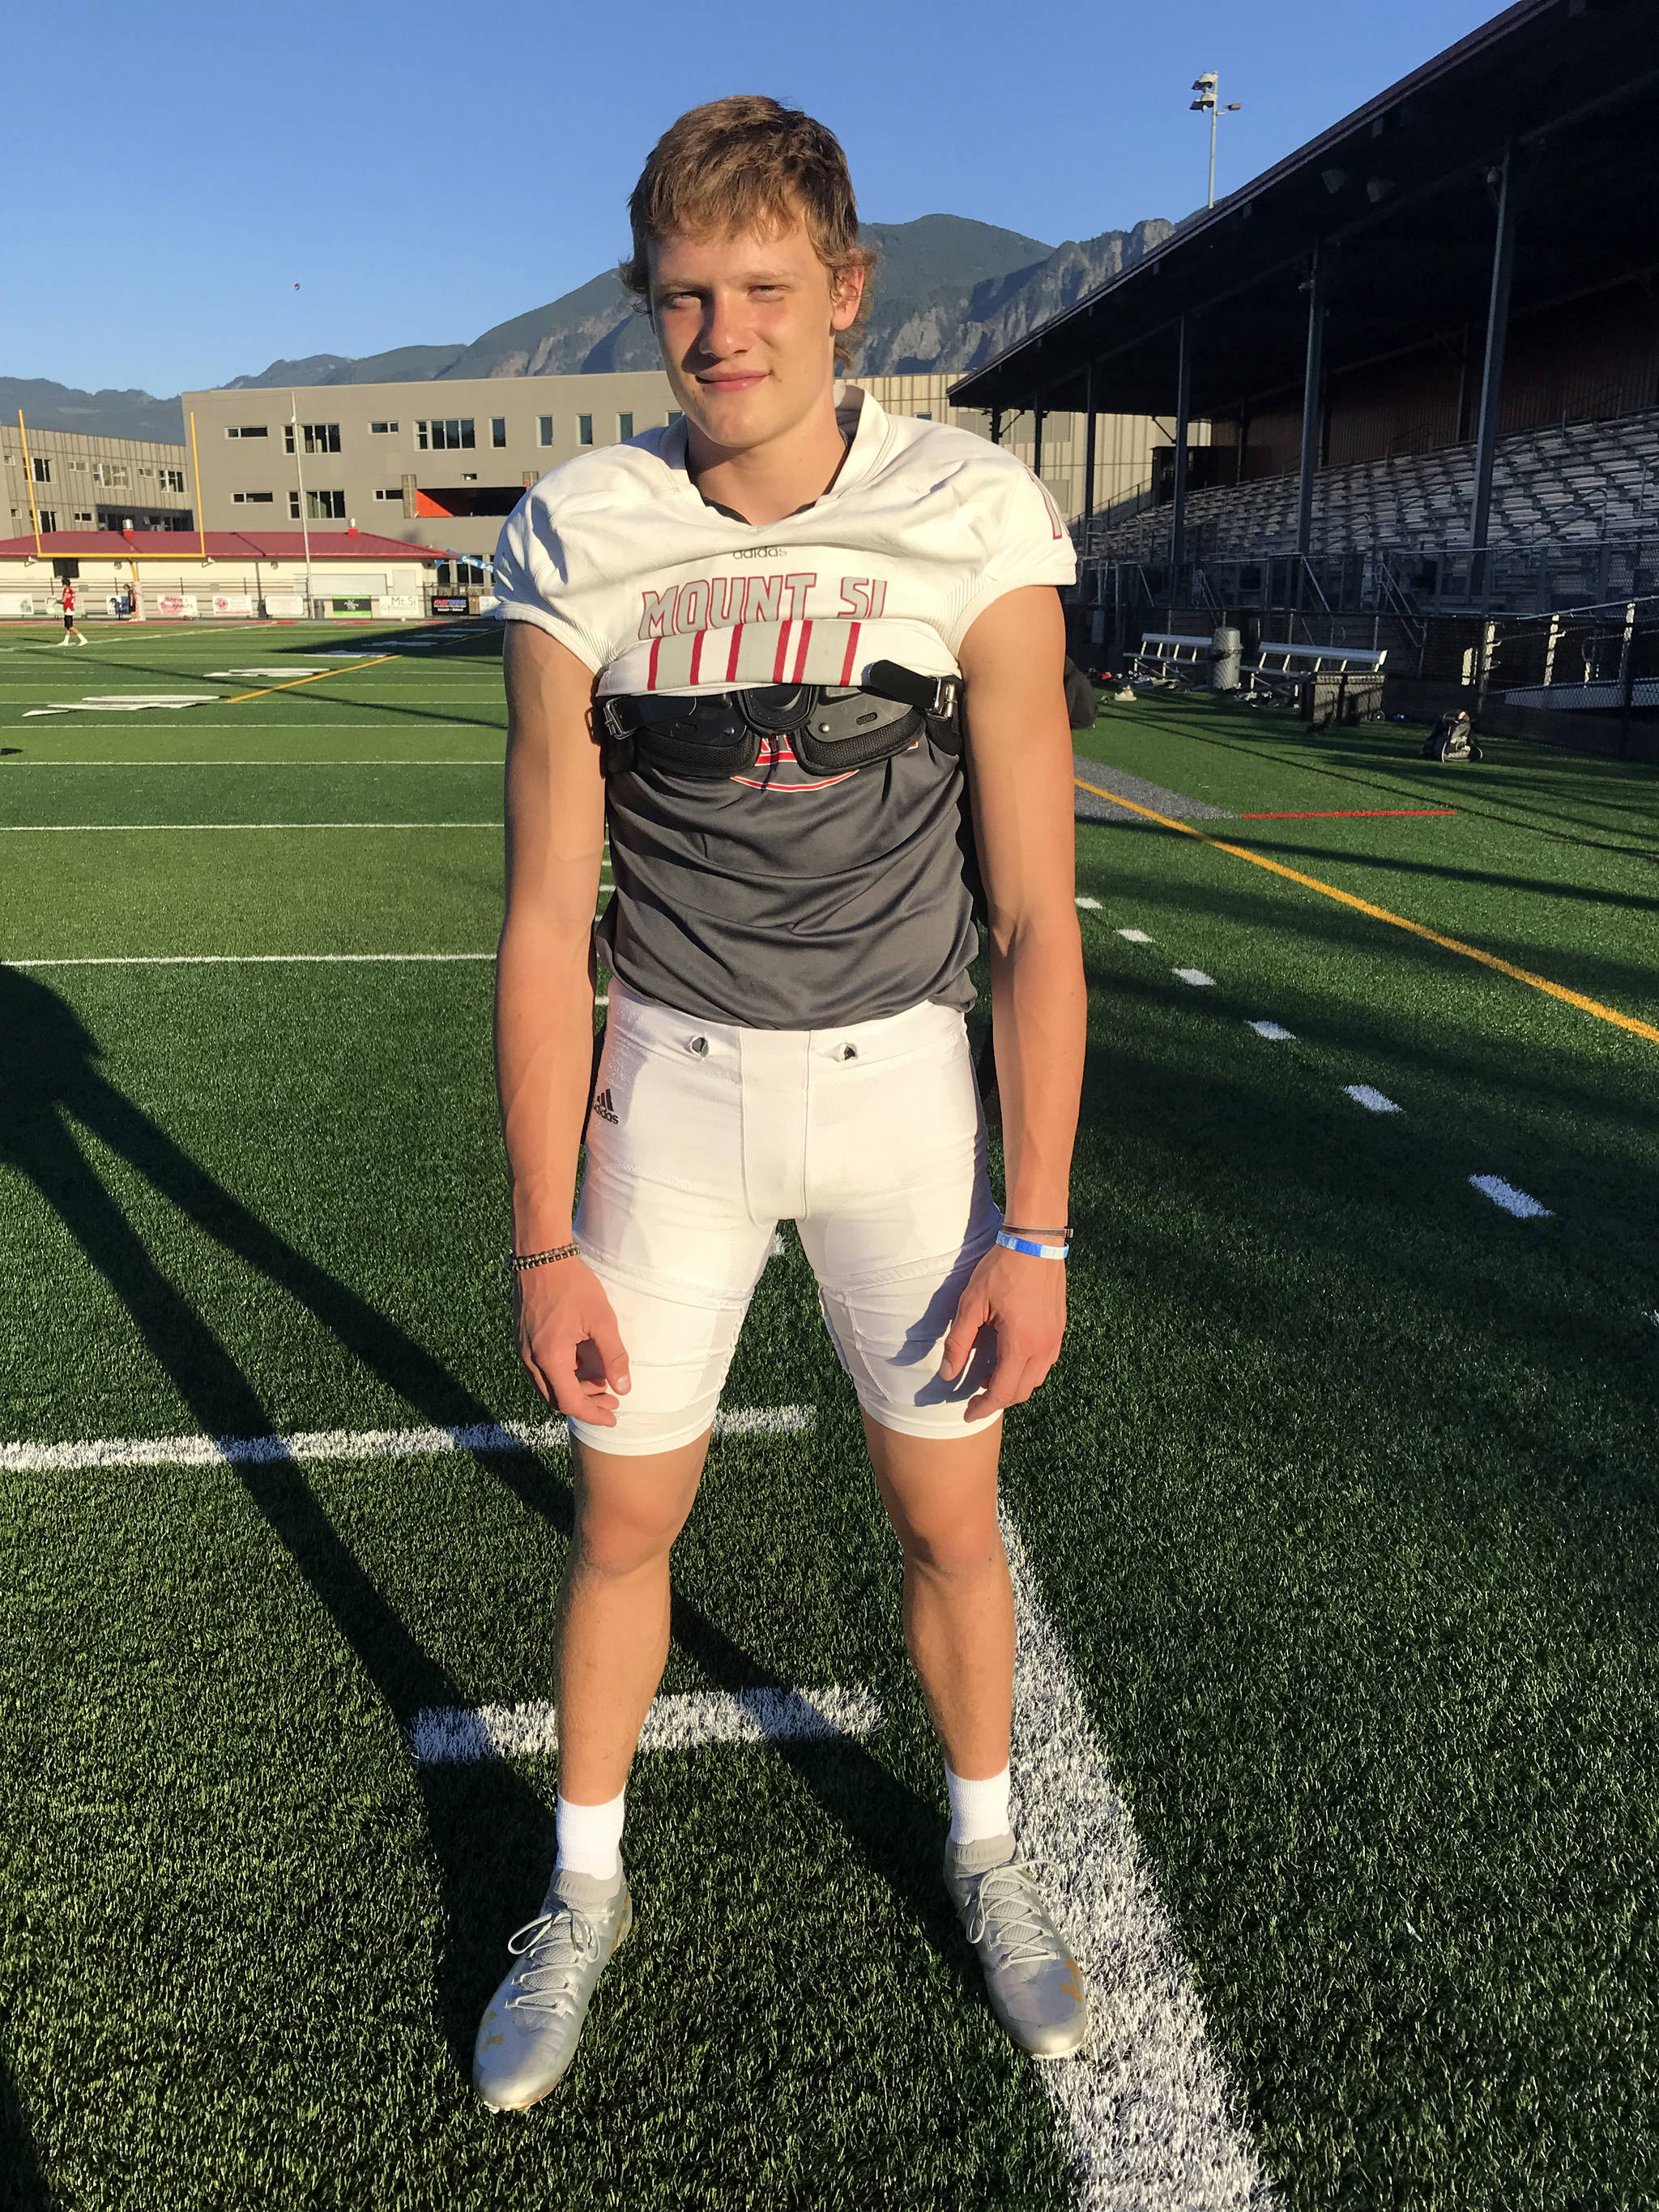 Mount Si Wildcats senior quarterback Cale Millen, who will play college football at the University of Oregon next fall, has 30 touchdown passes and just four interceptions through the first seven games of the 2018 football season. The Wildcats currently have an overall record of 7-0. Shaun Scott/staff photo